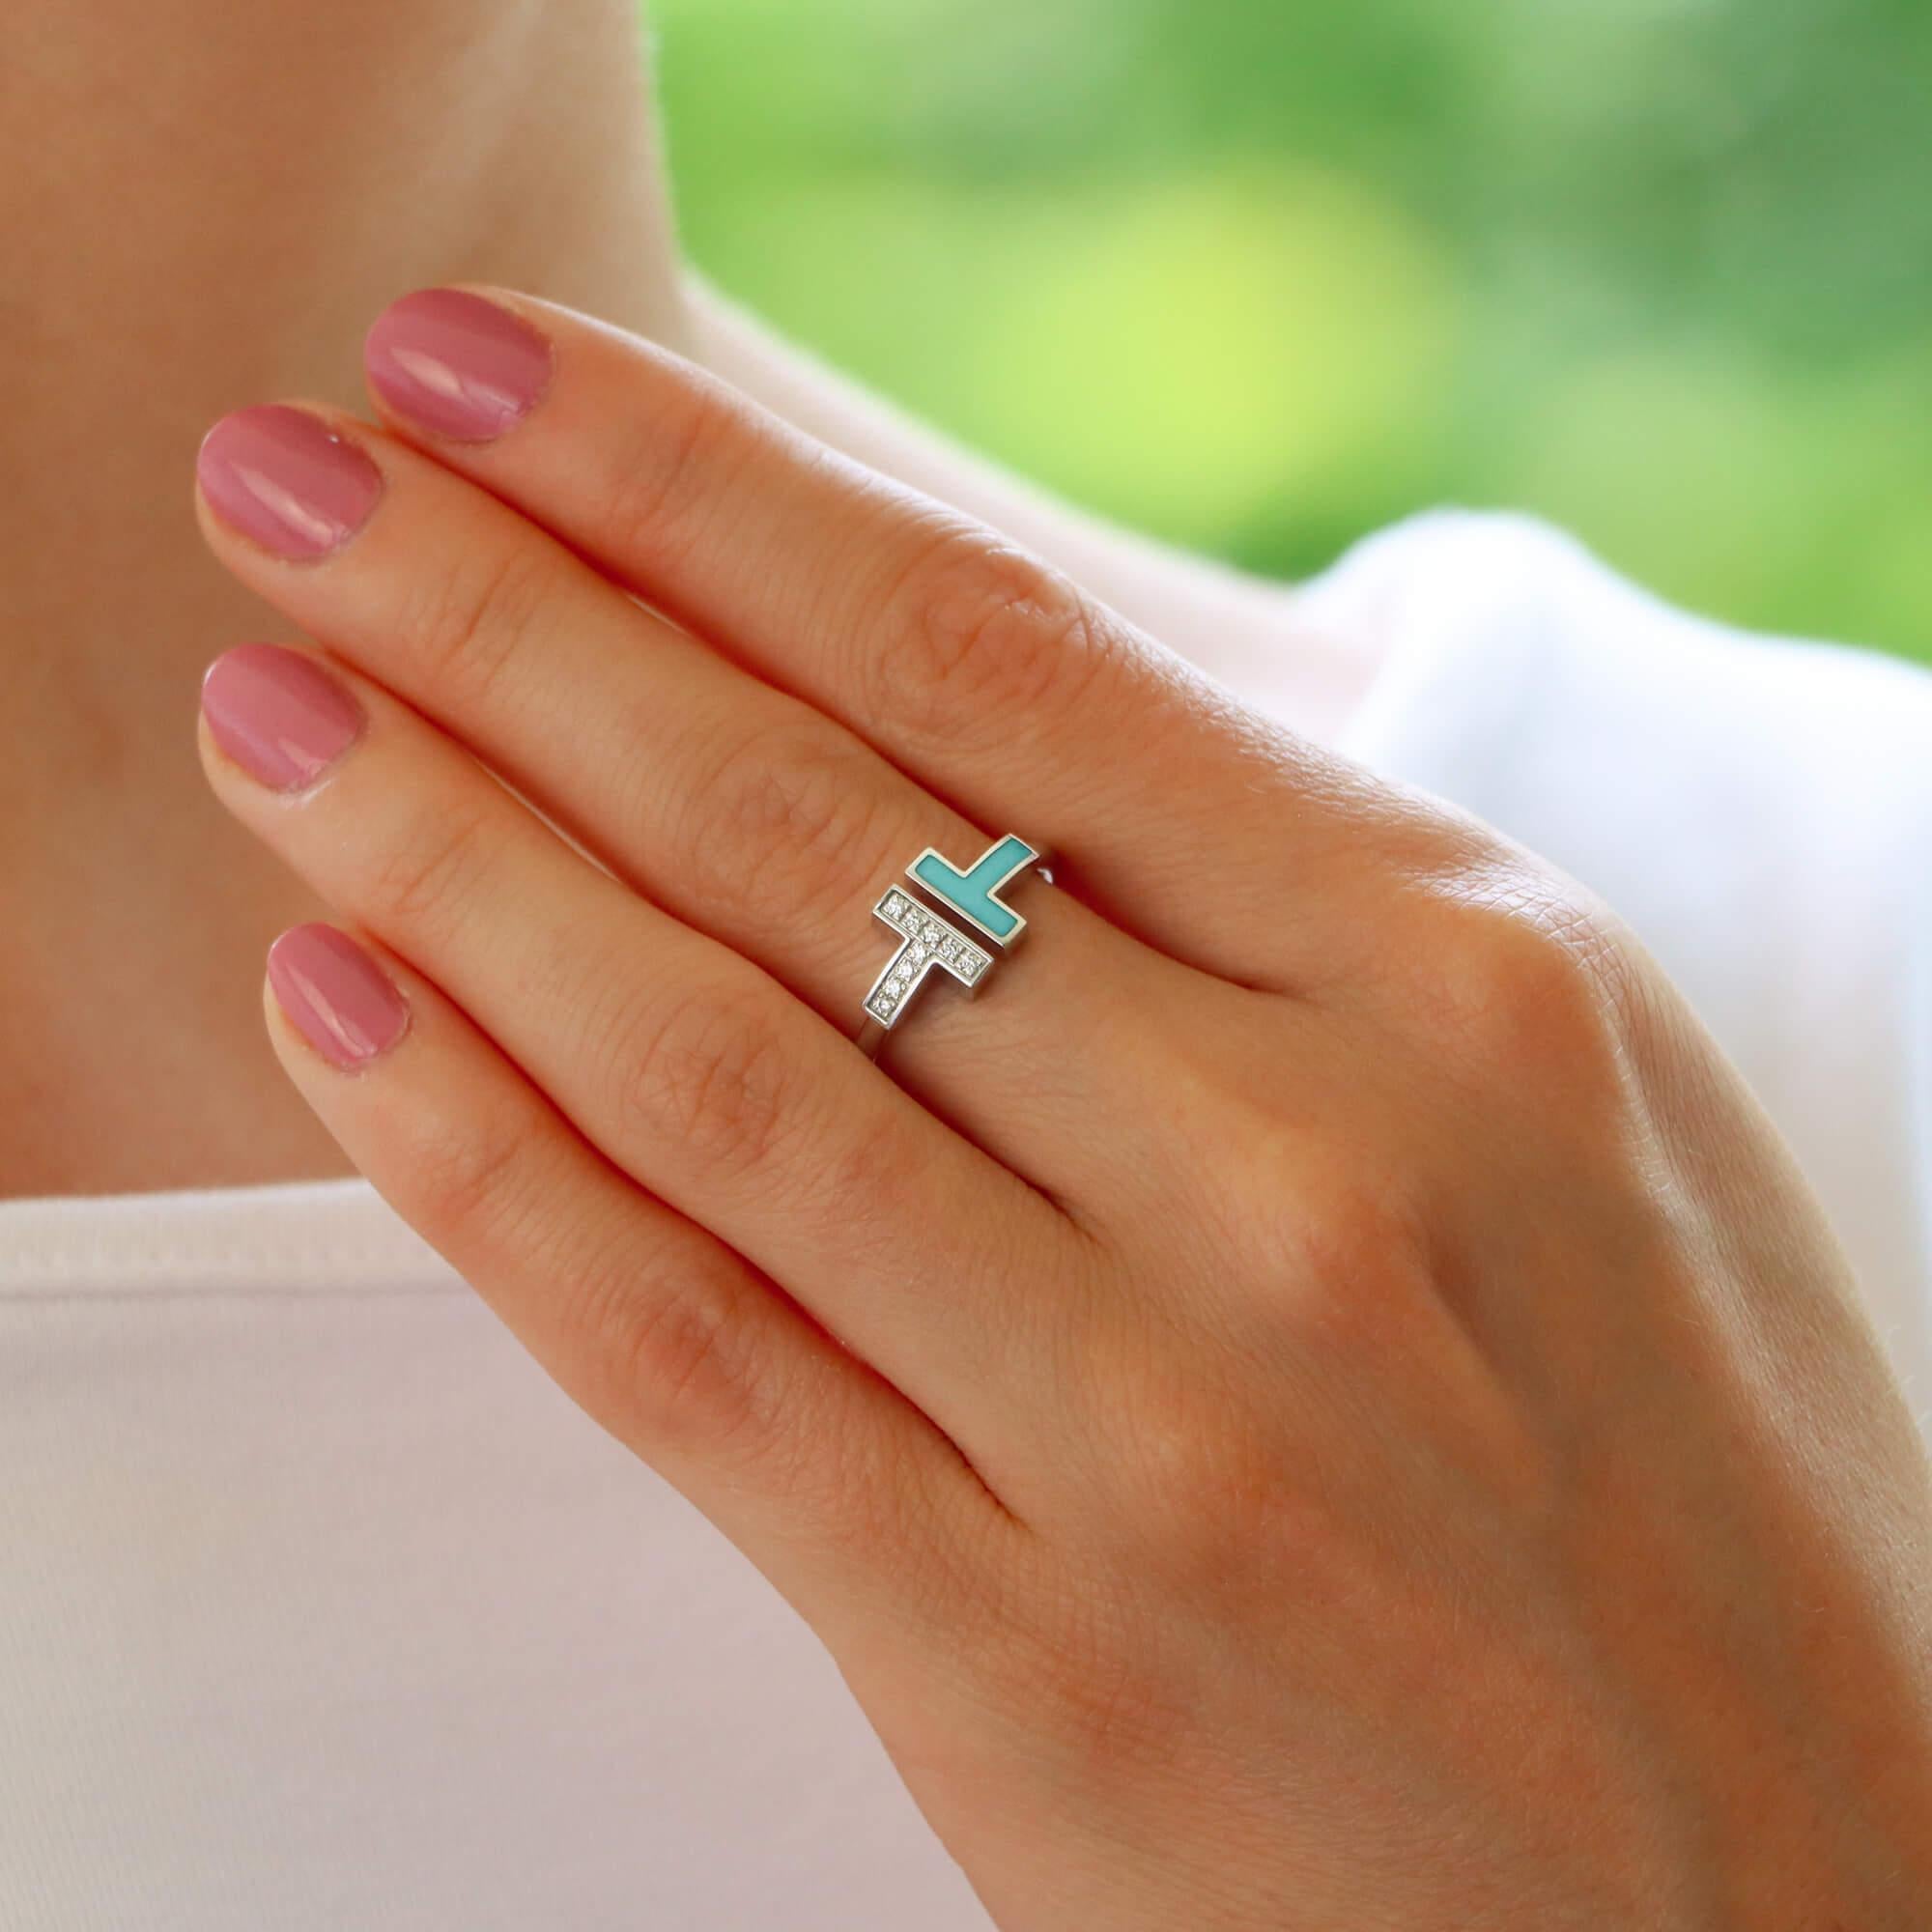 A stylish vintage Tiffany & Co. ‘Tiffany T’ turquoise and diamond ring set in 18k white gold.

From the current Tiffany T collection, the ring is set with exactly 9 round brilliant cut diamonds in a polished white gold band design. To the opposite